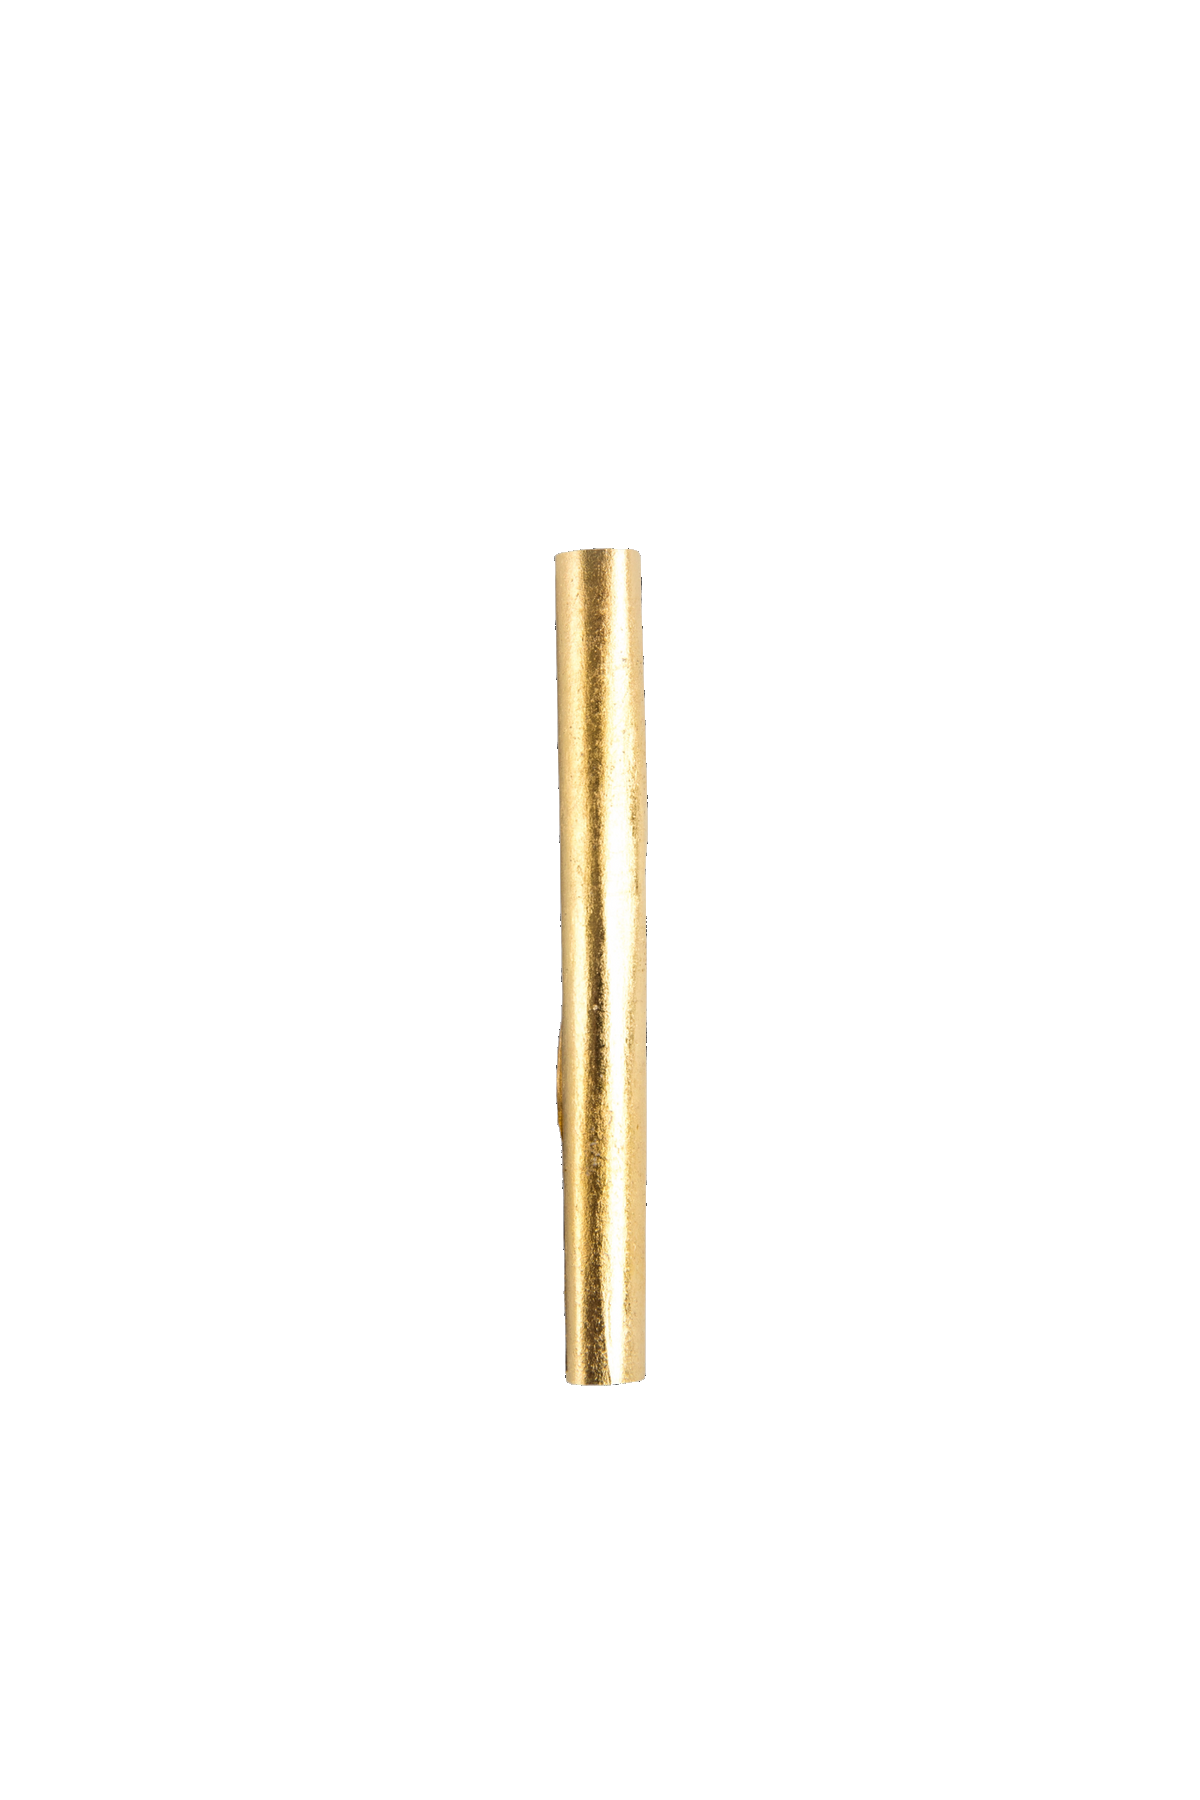 shine 24k gold rolling paper joint king size